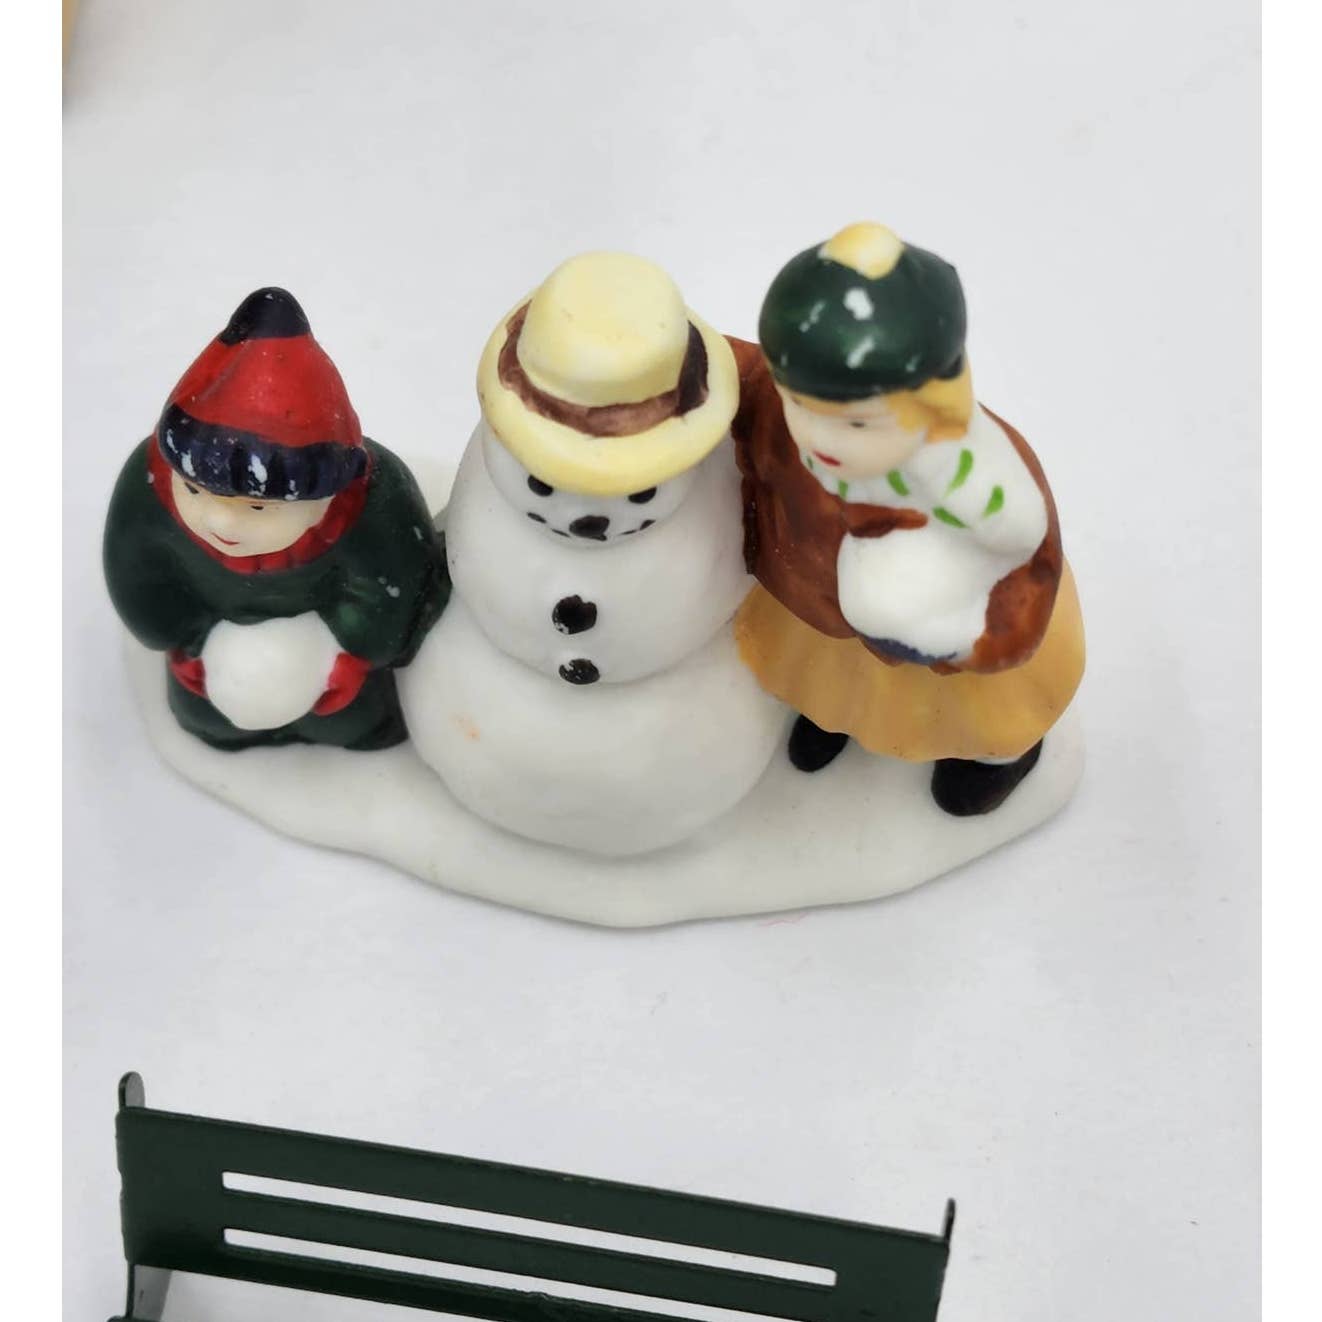 Vintage Christmas Village Figurines Mixed Lot 6 Avon Country Bench, Carolers